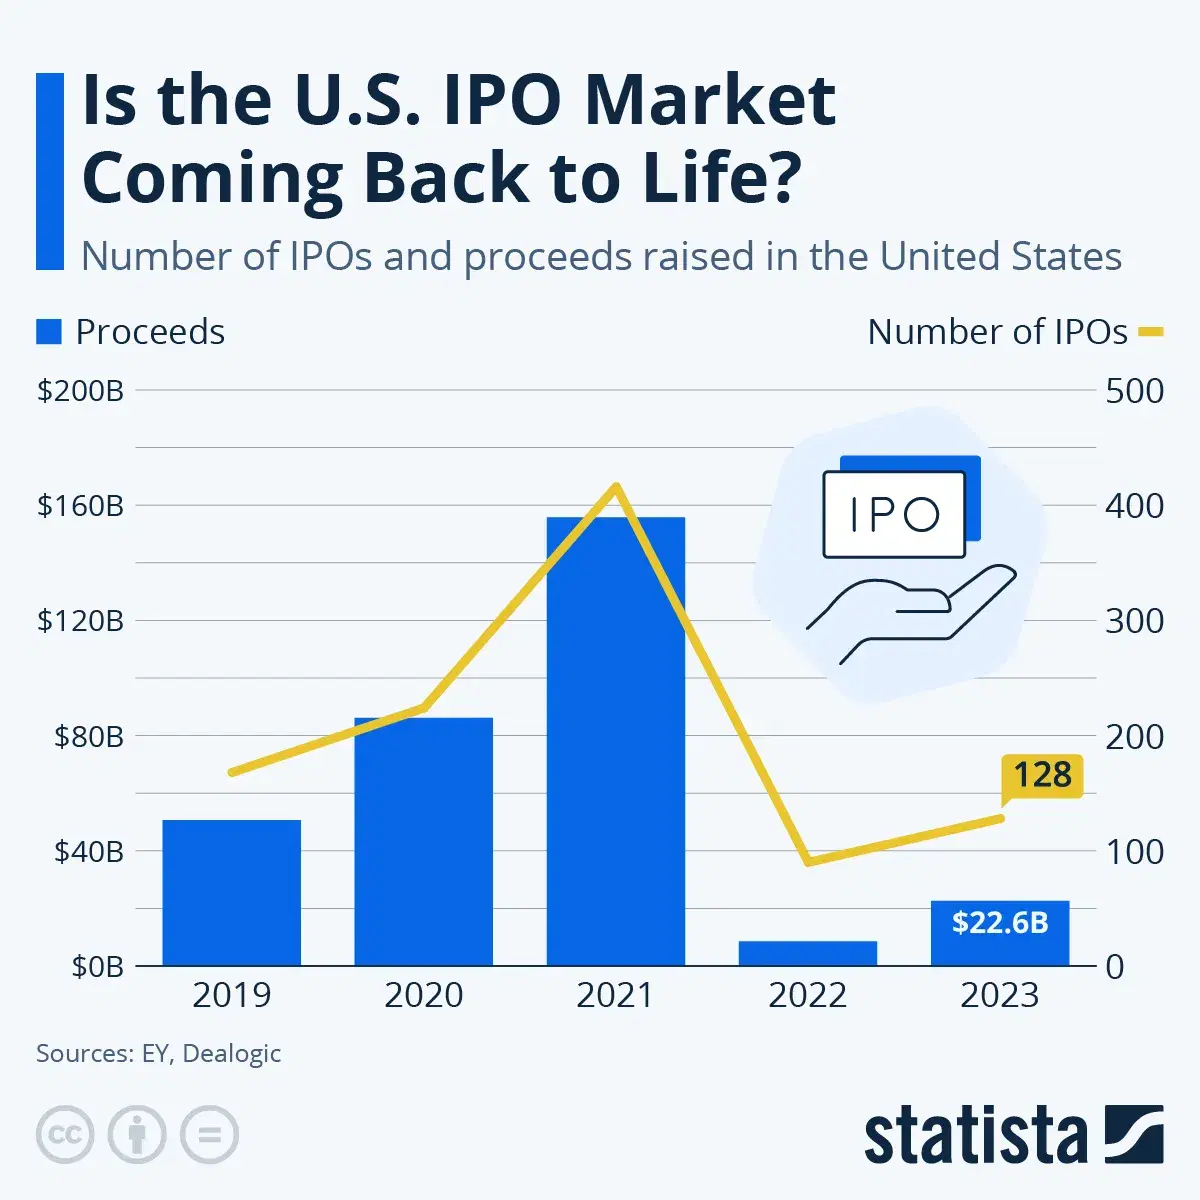 Is the U.S. IPO Market Coming Back to Life?